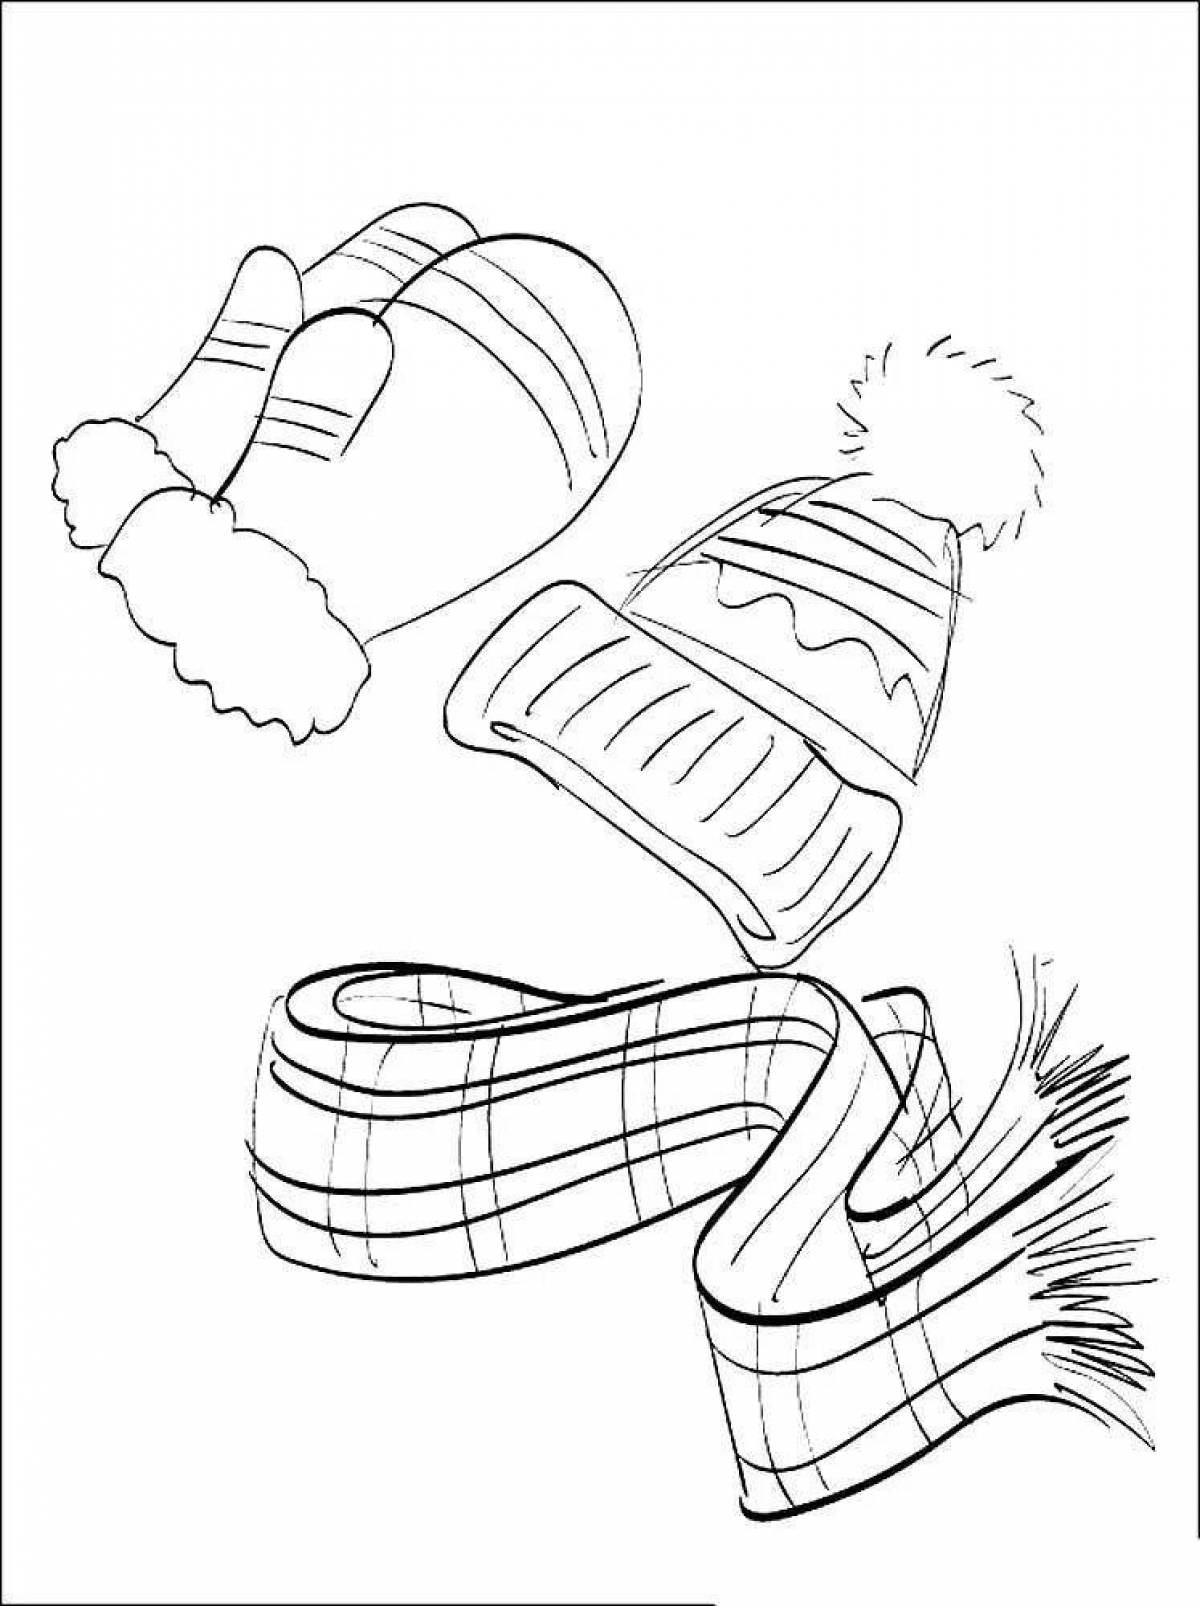 Luminous hat and scarf coloring page